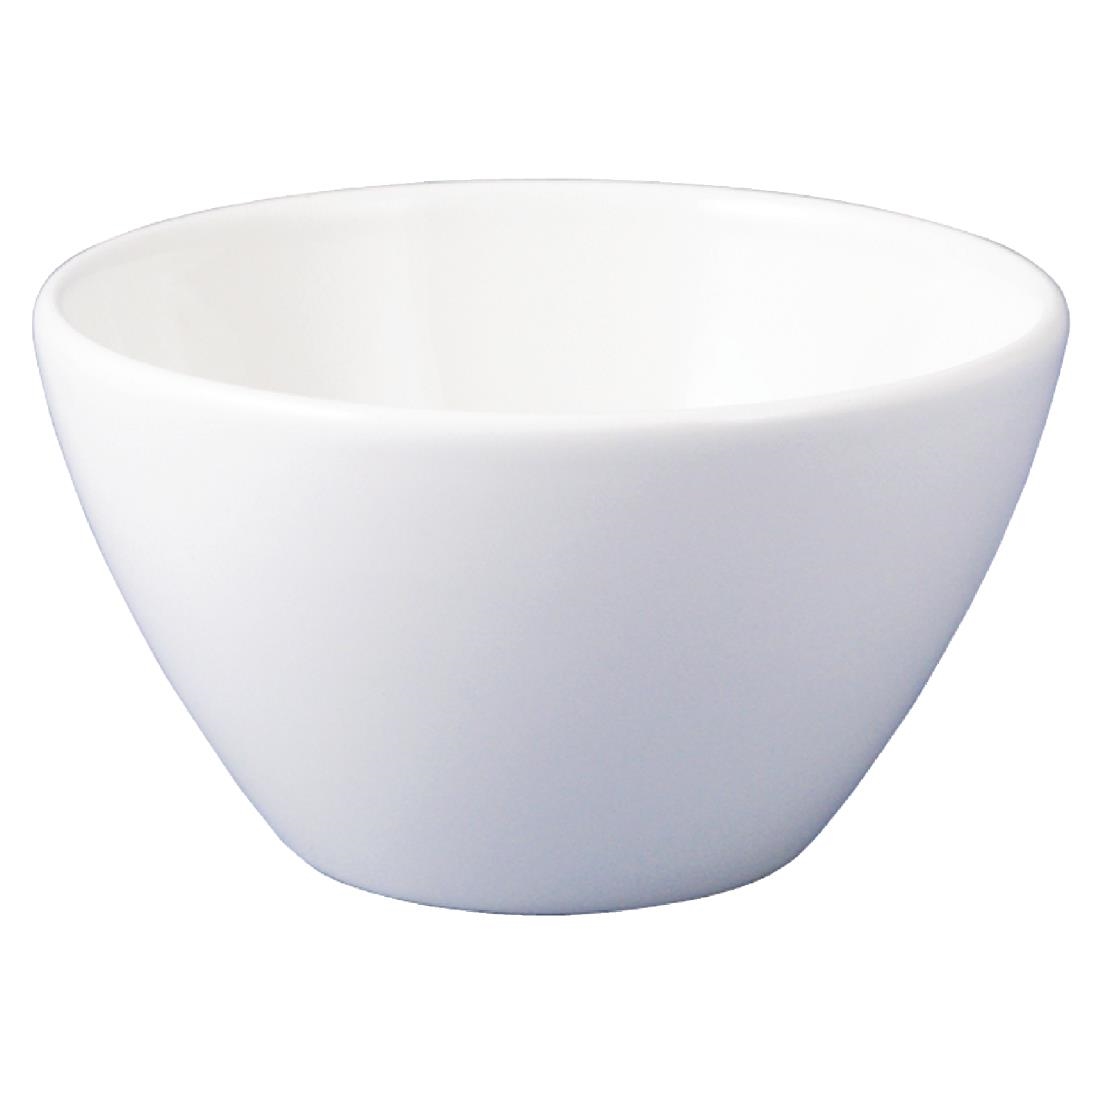 Dudson Classic Sugar Bowls (Pack of 36)